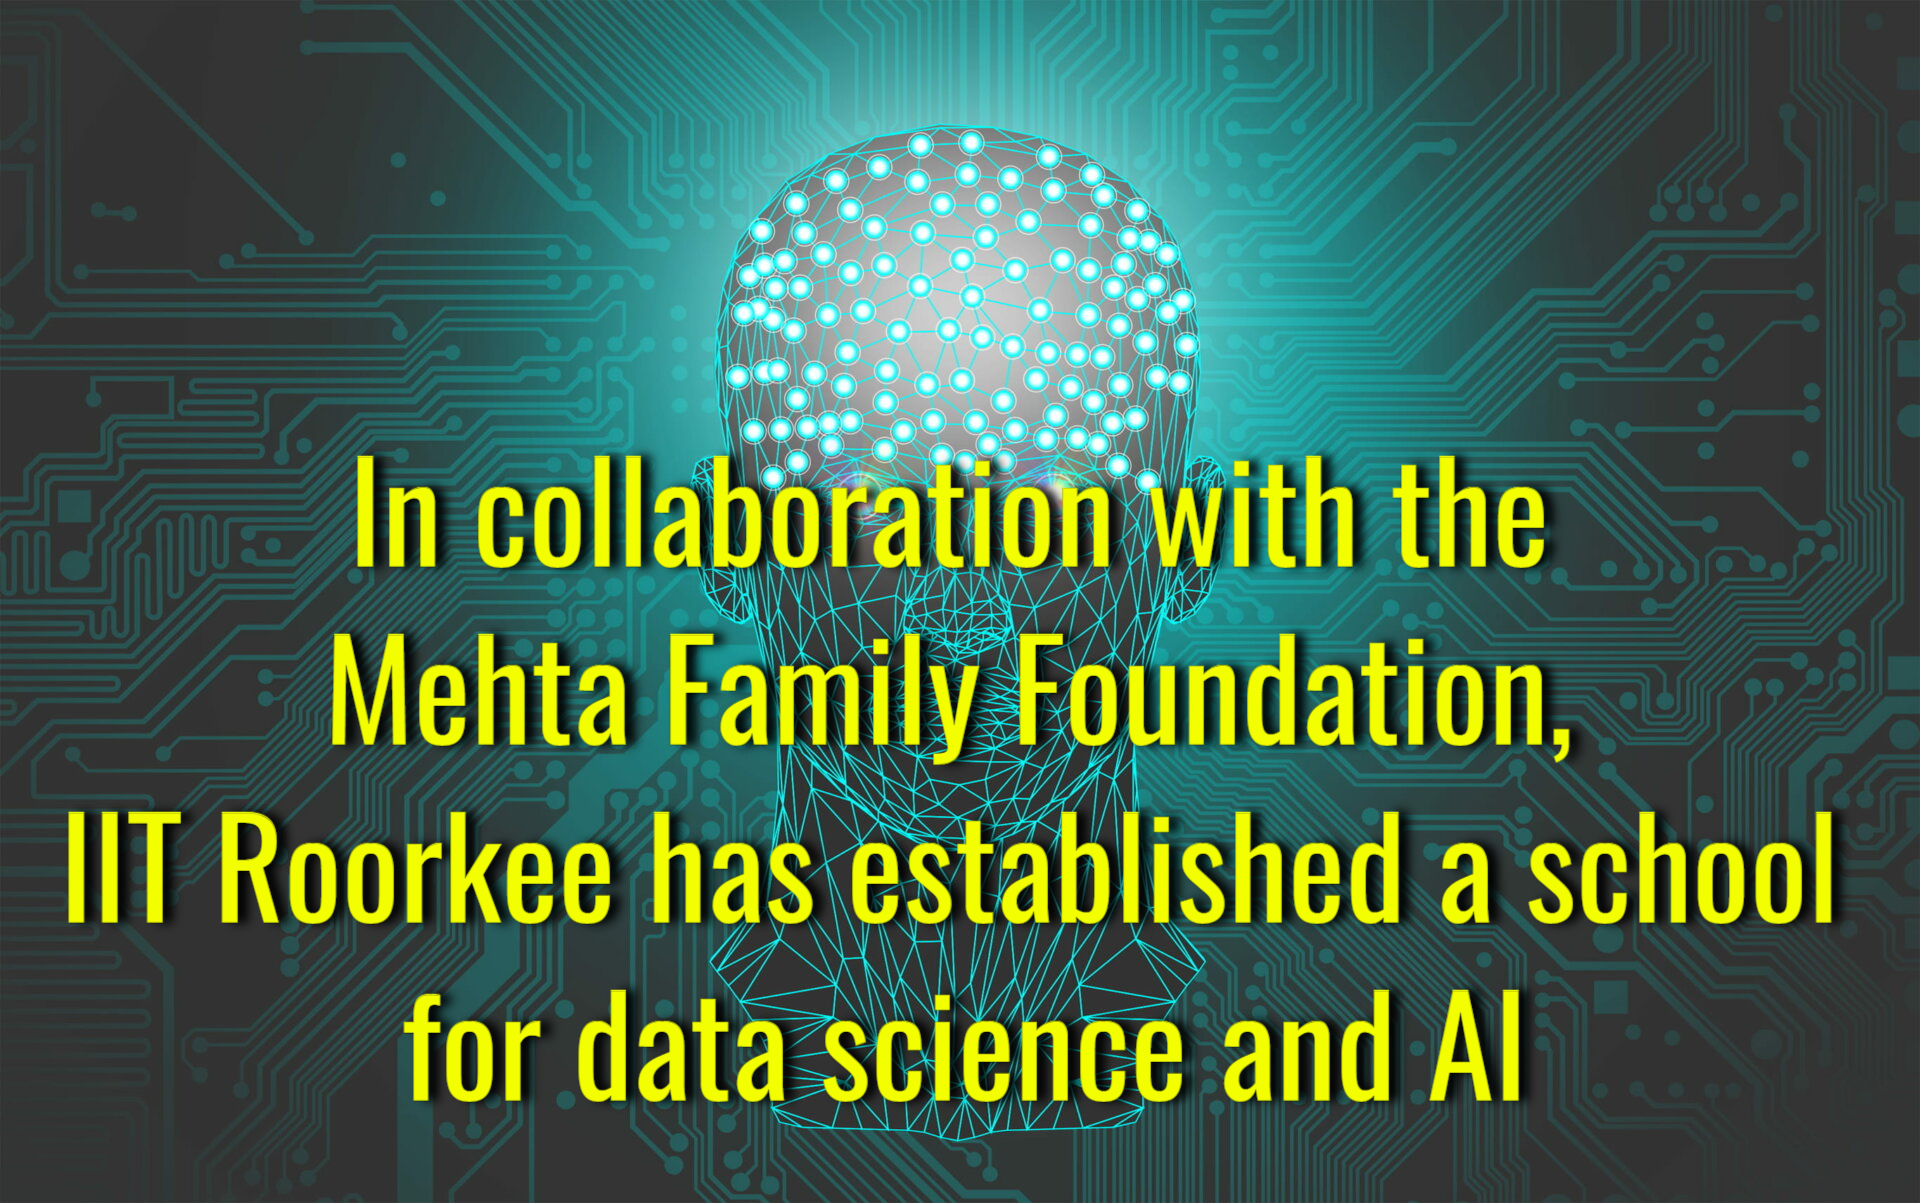 IIT Roorkee school for data science and AI is established in collaboration with the Mehta Family Foundation